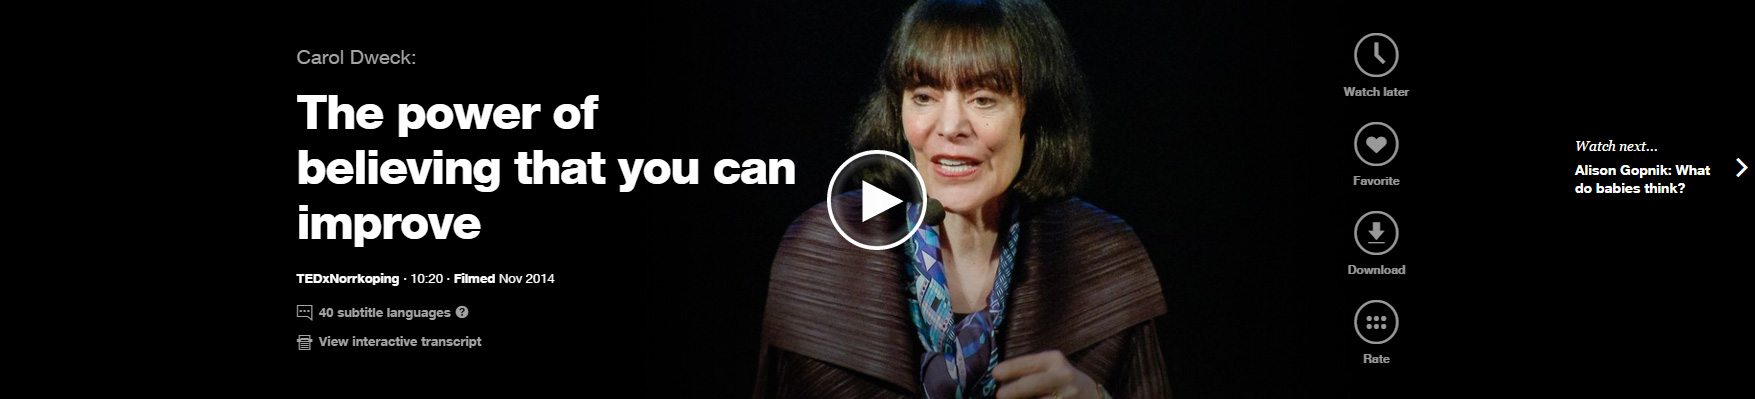 The power of believing you can improve Carol Dweck